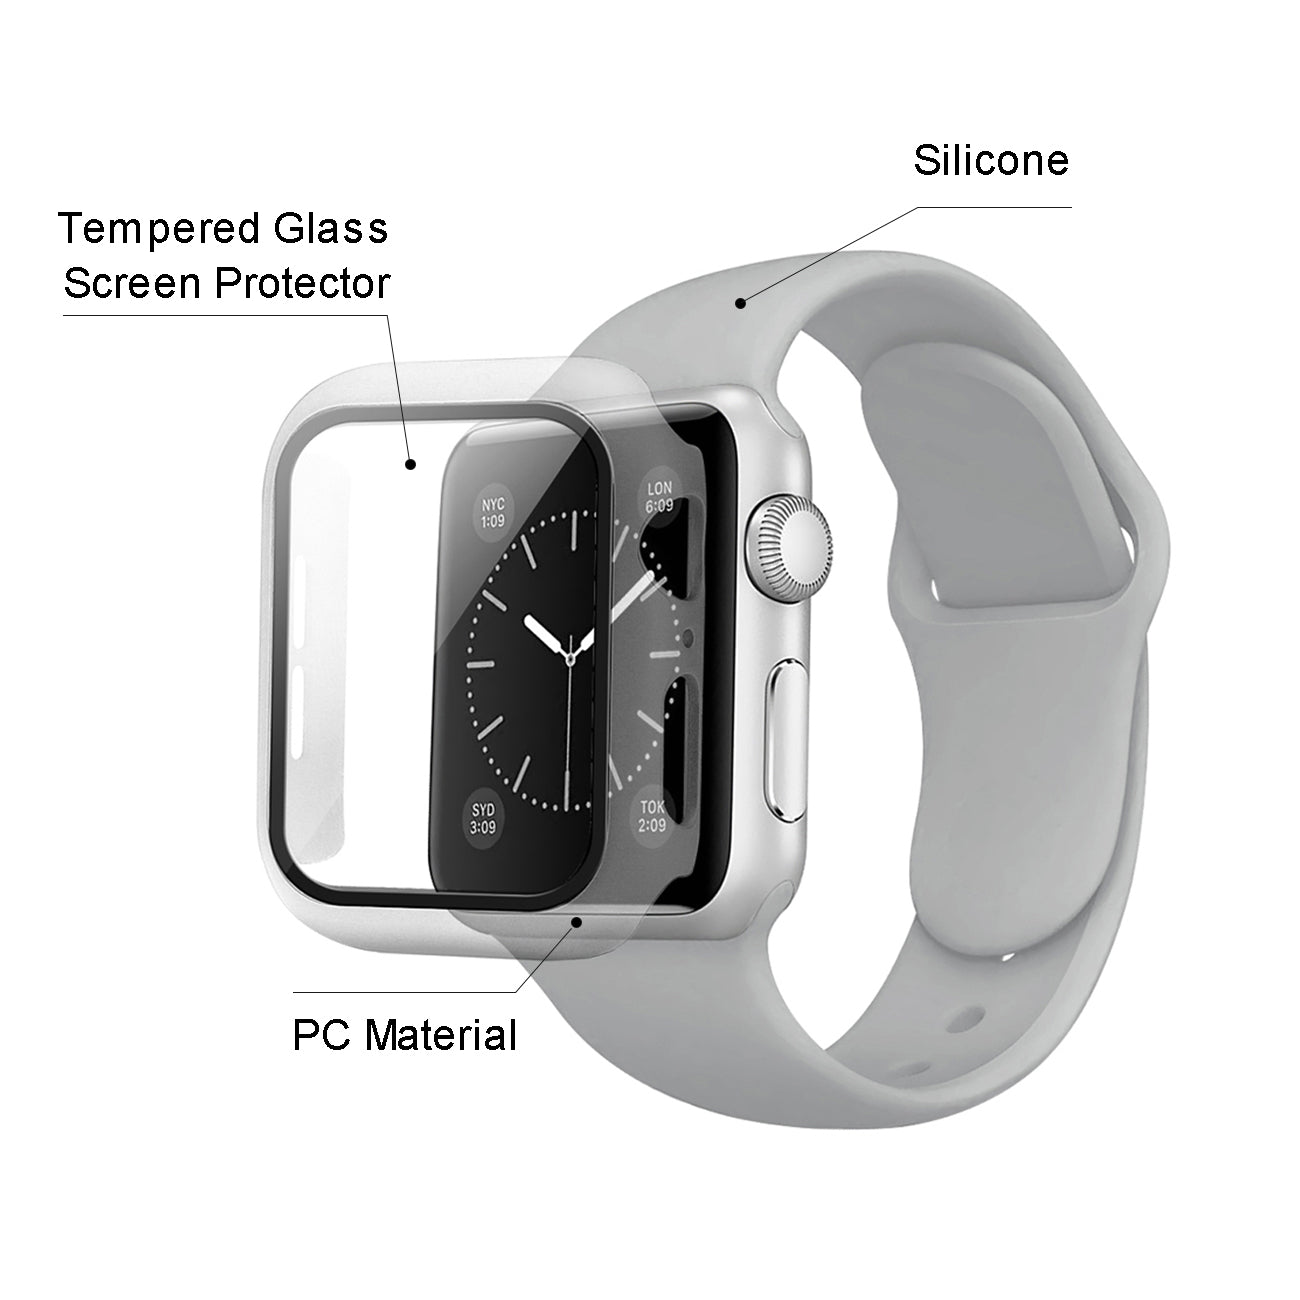 Watch Case PC With Glass Screen Protector, Silicone Watch Band Apple Watch 40mm Gray Color